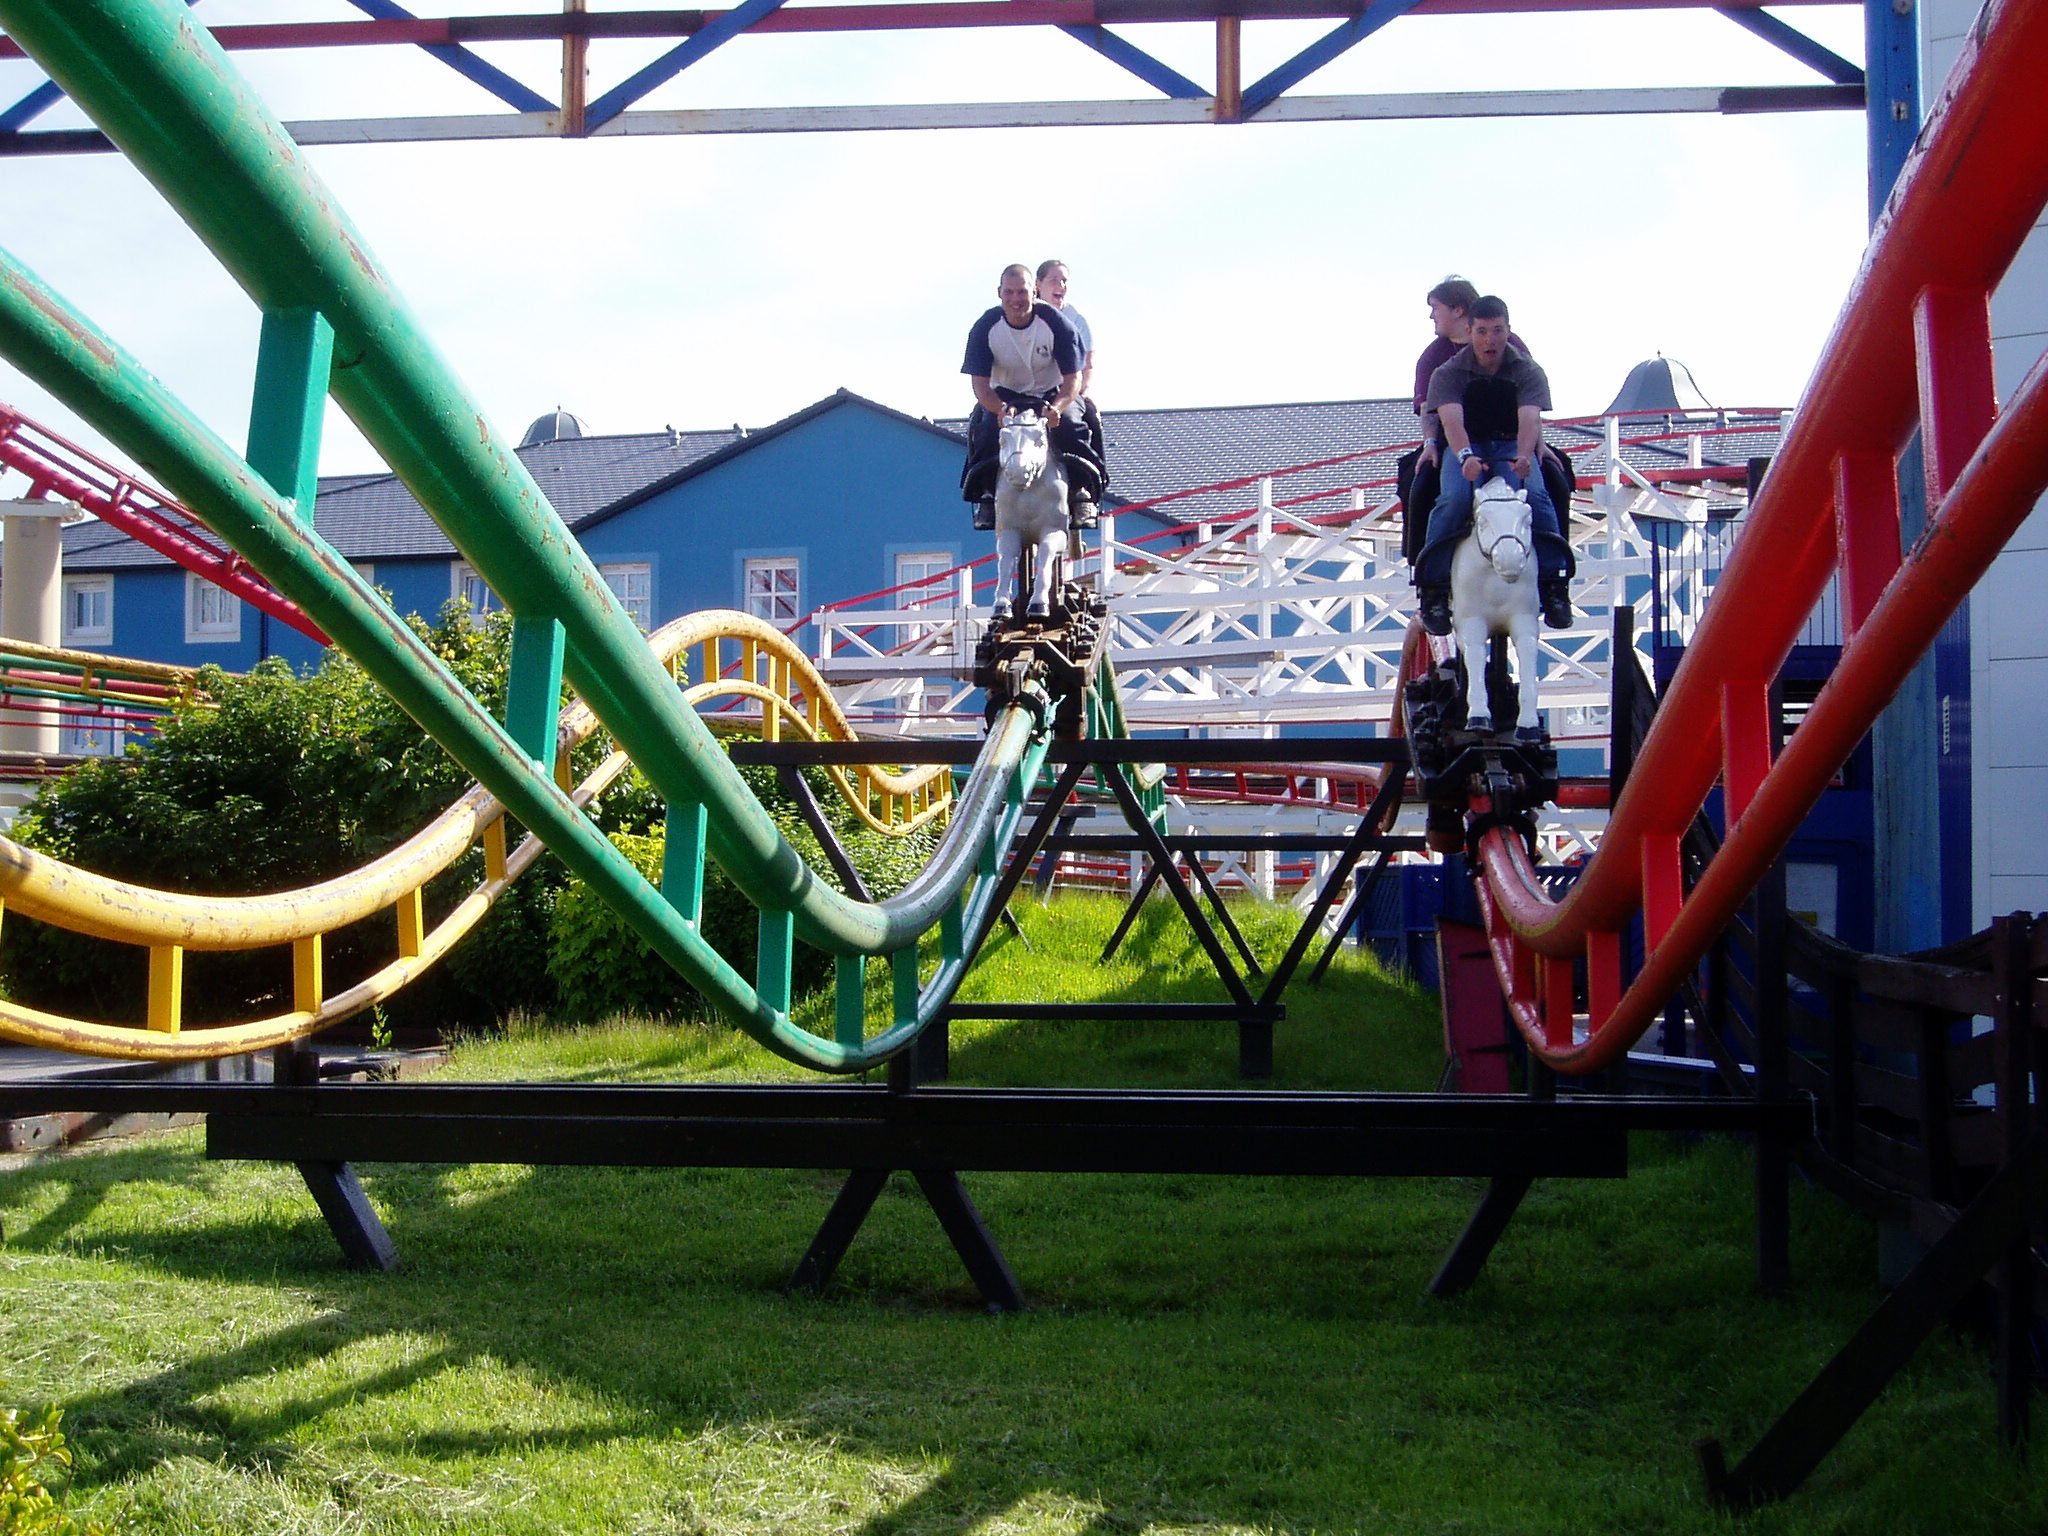 You are currently viewing Steeplechase (Green) (Blackpool Pleasure Beach)